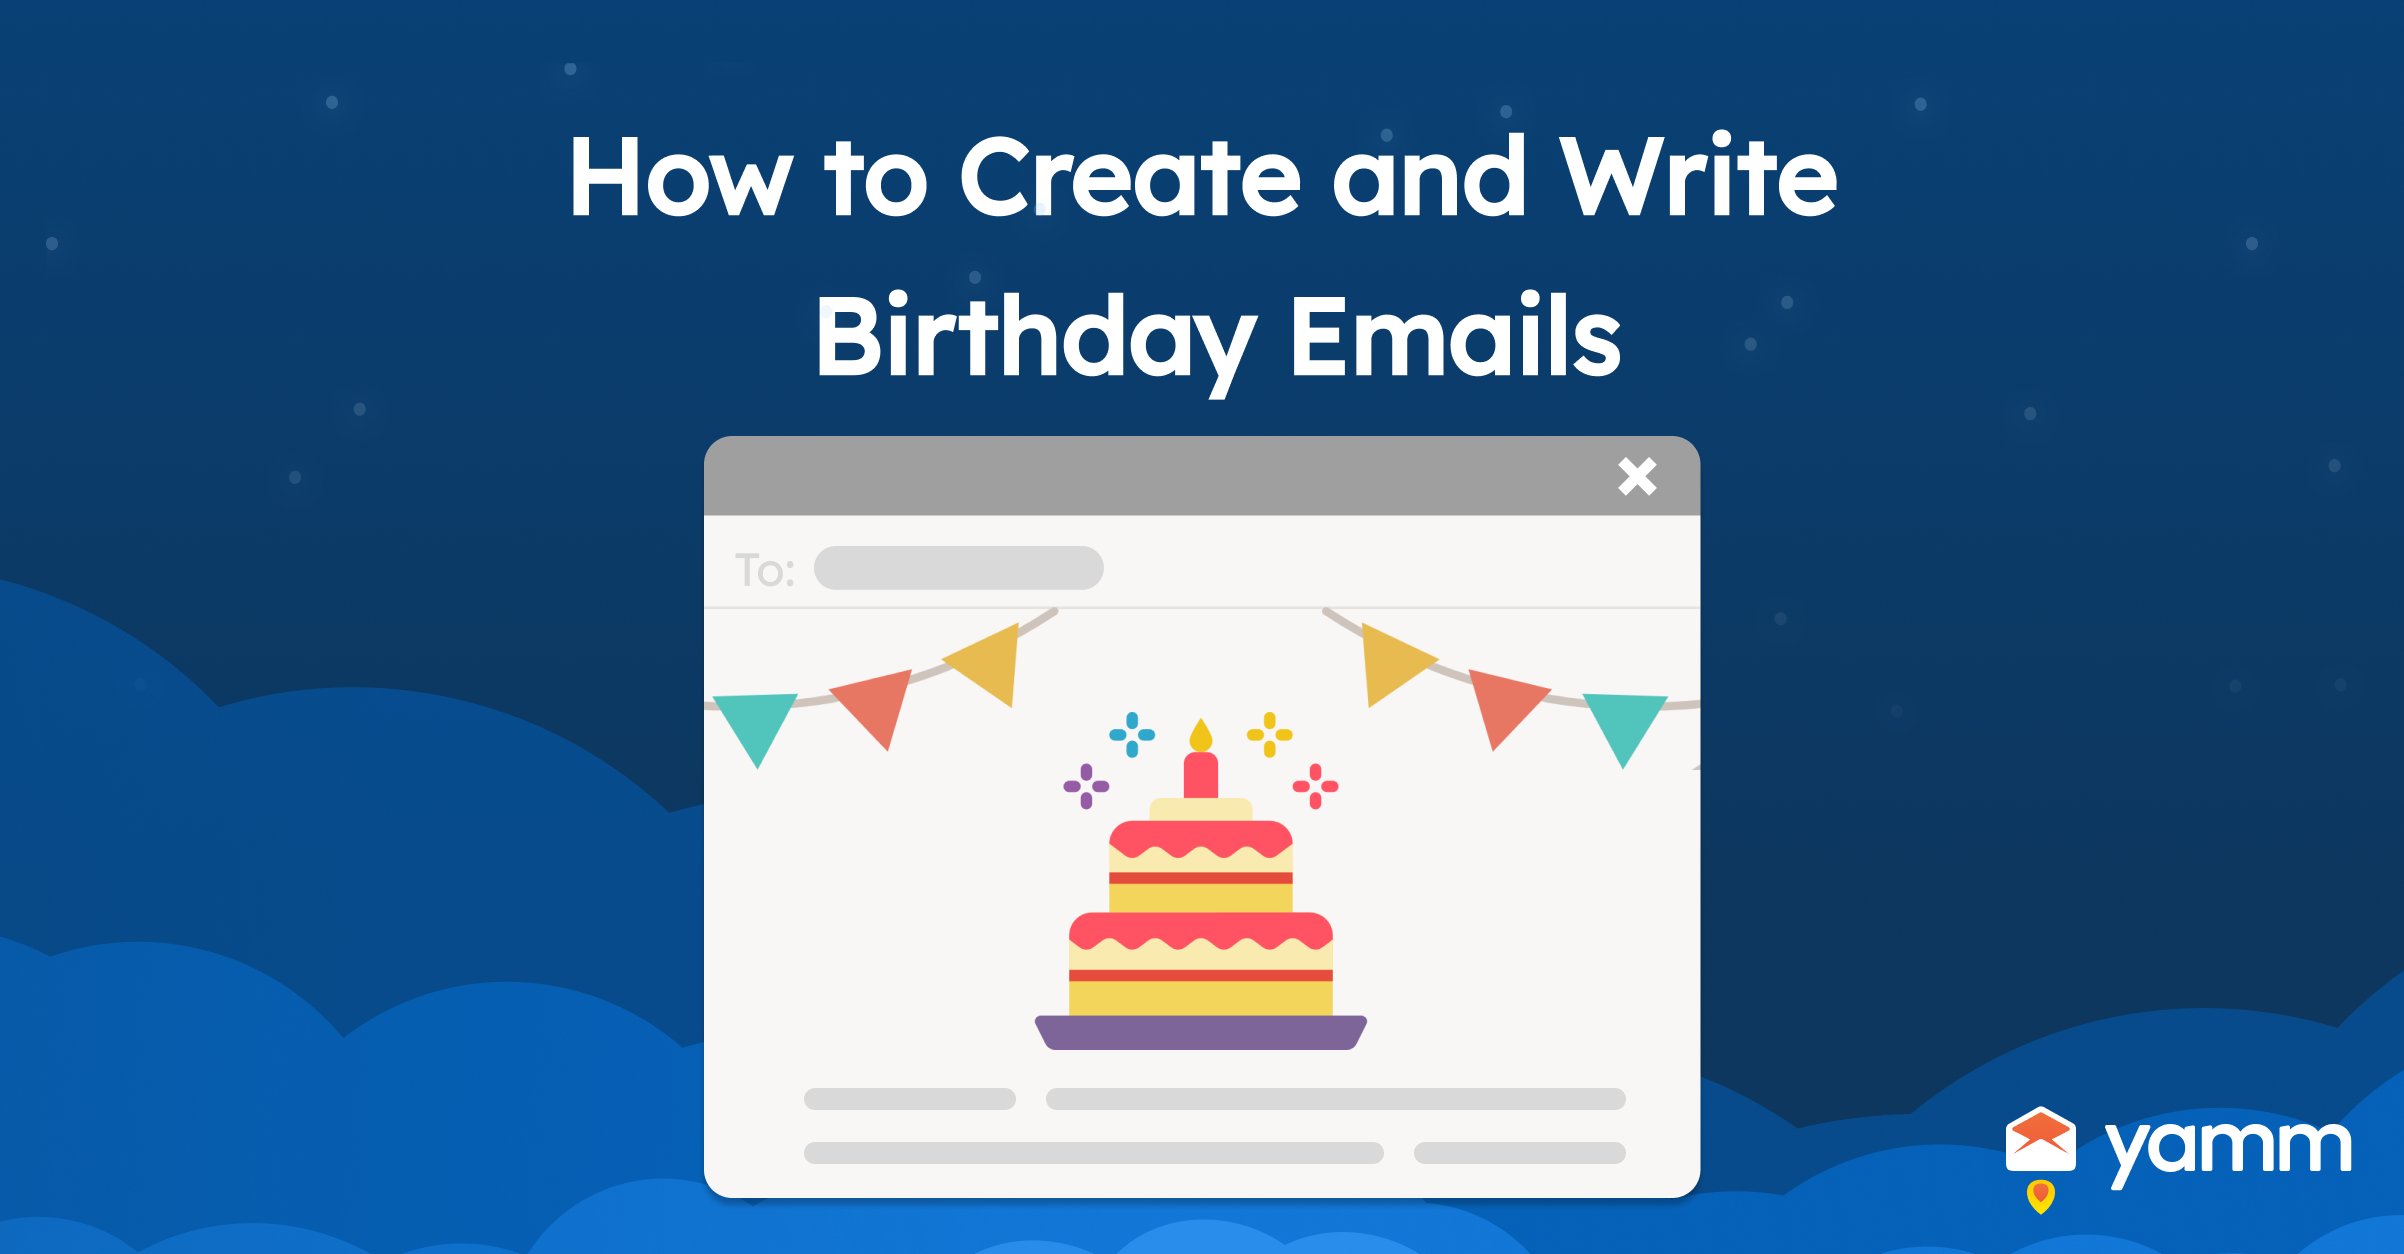 How to Create and Write Birthday emails